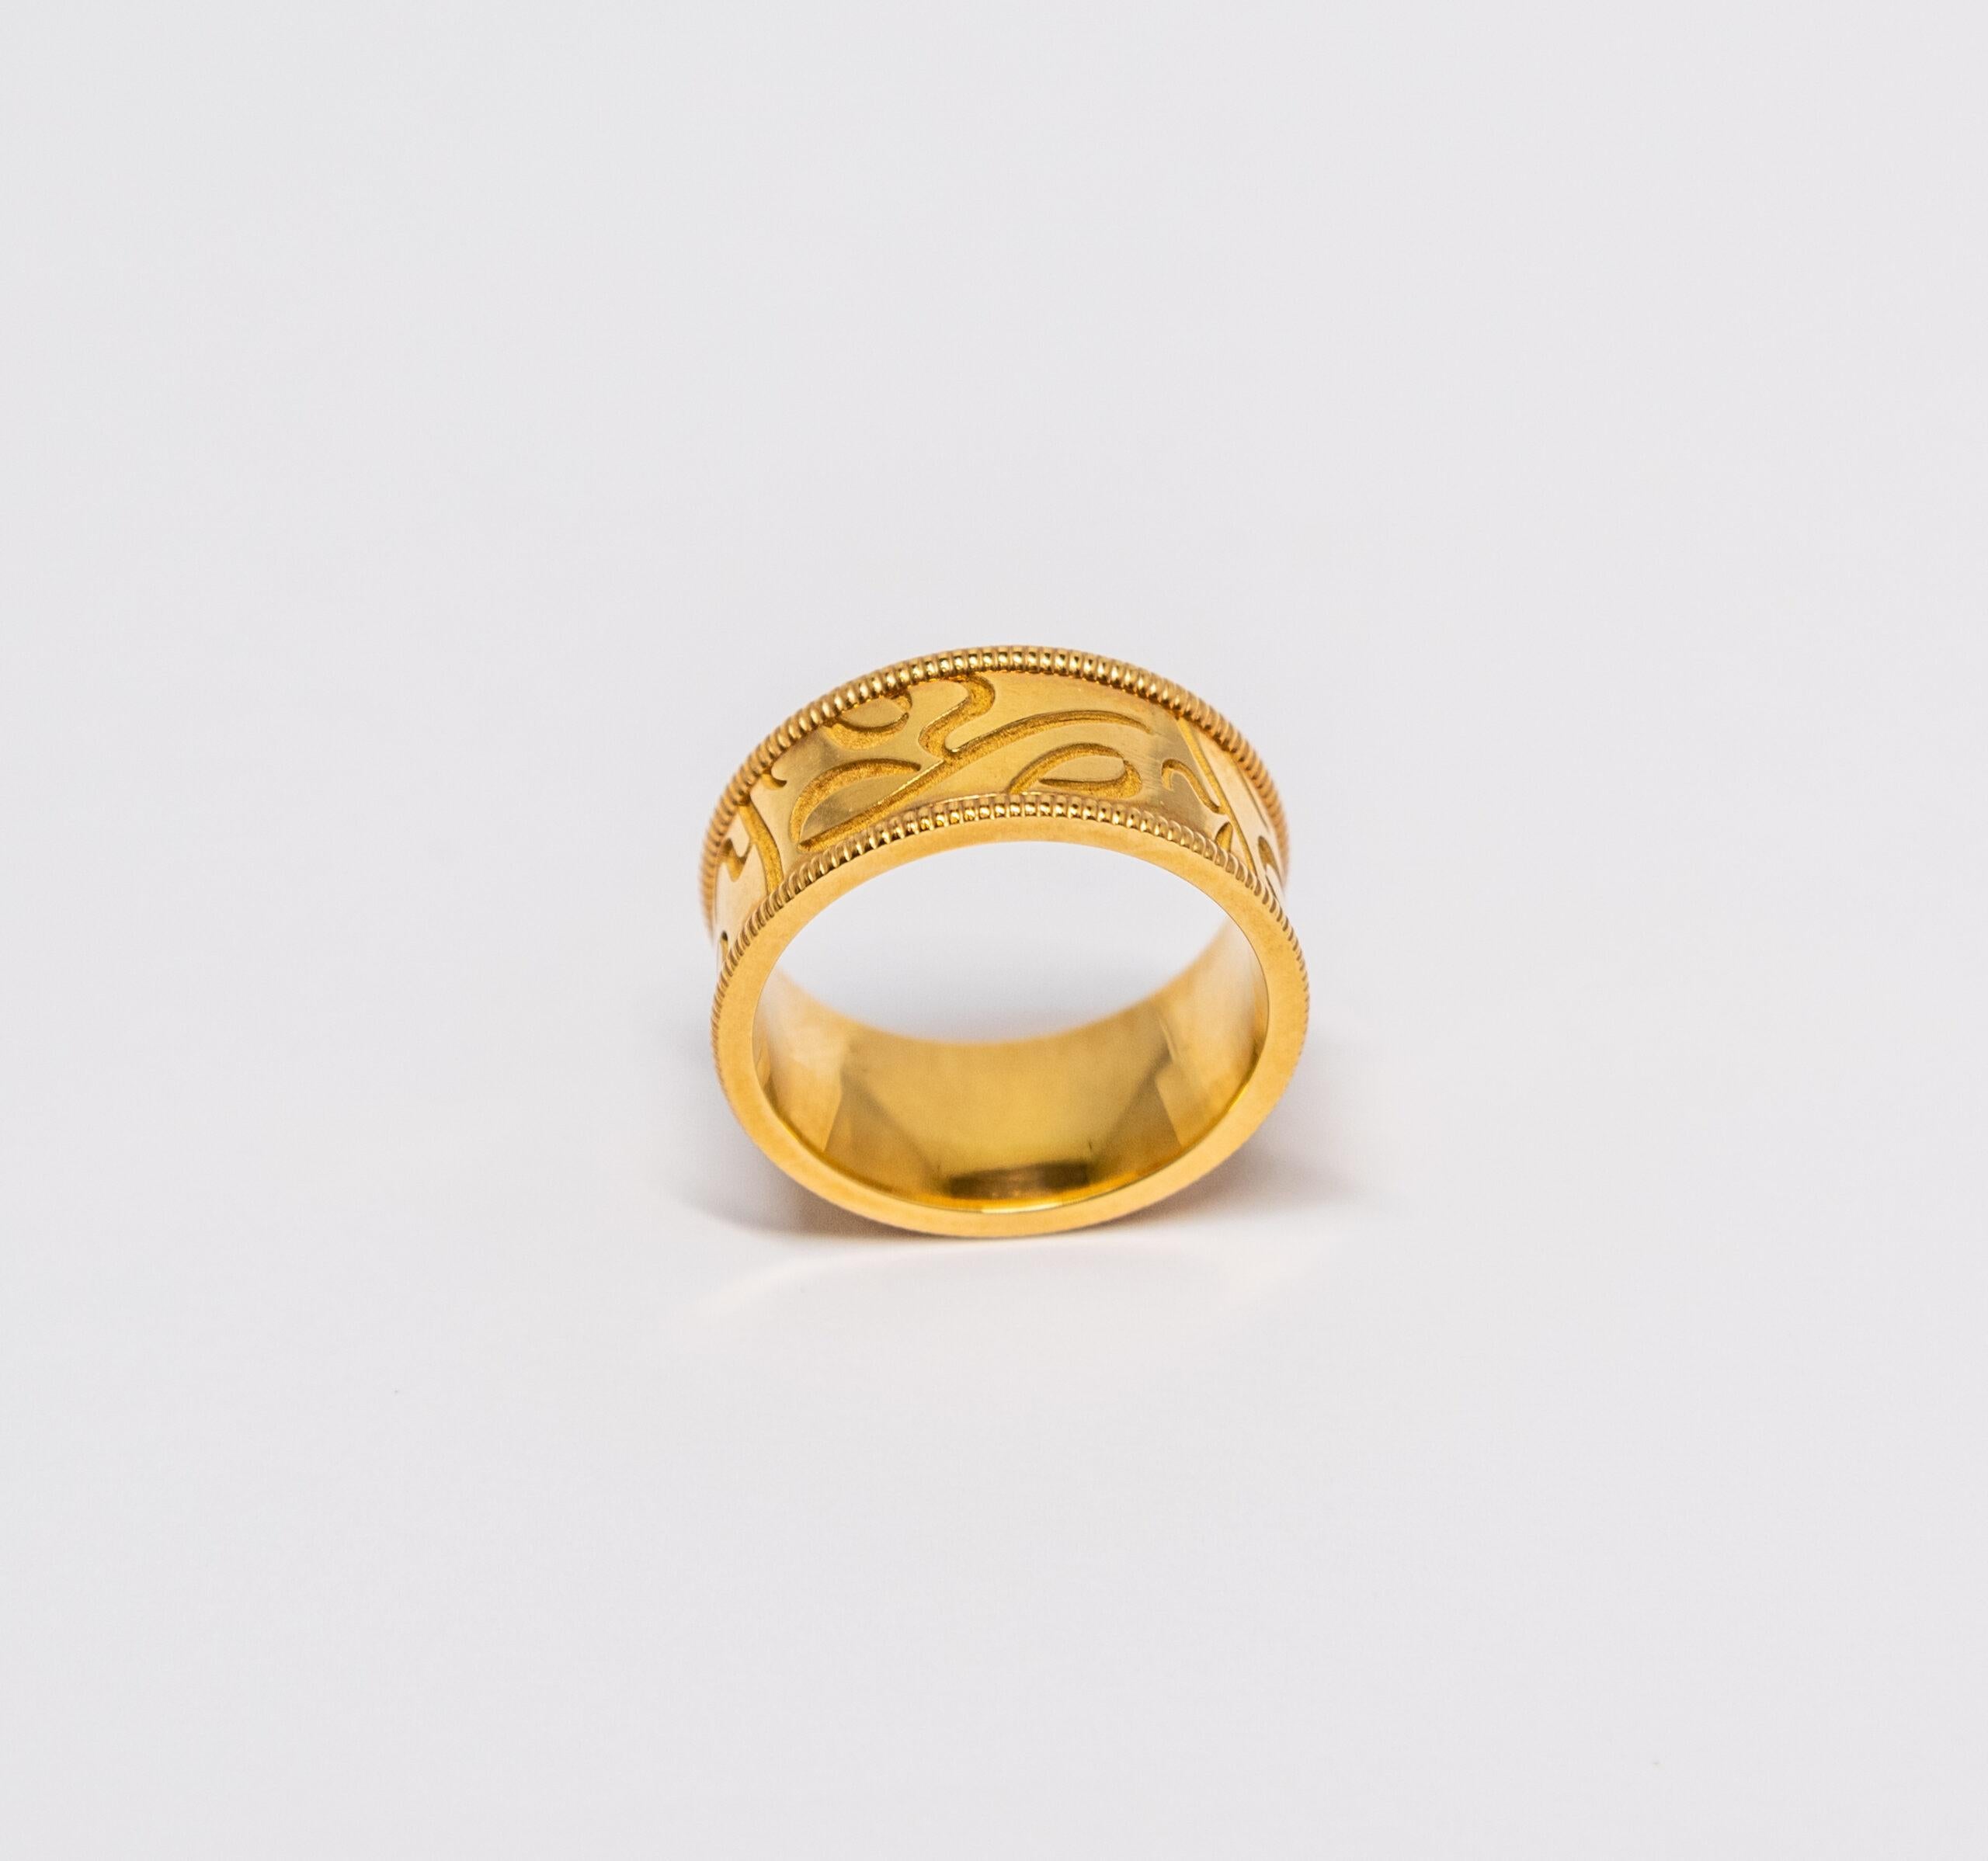 This ring is made of 18K Yellow Gold. Band ring with engraved “Y” letters.

Size – 55 (7 US)